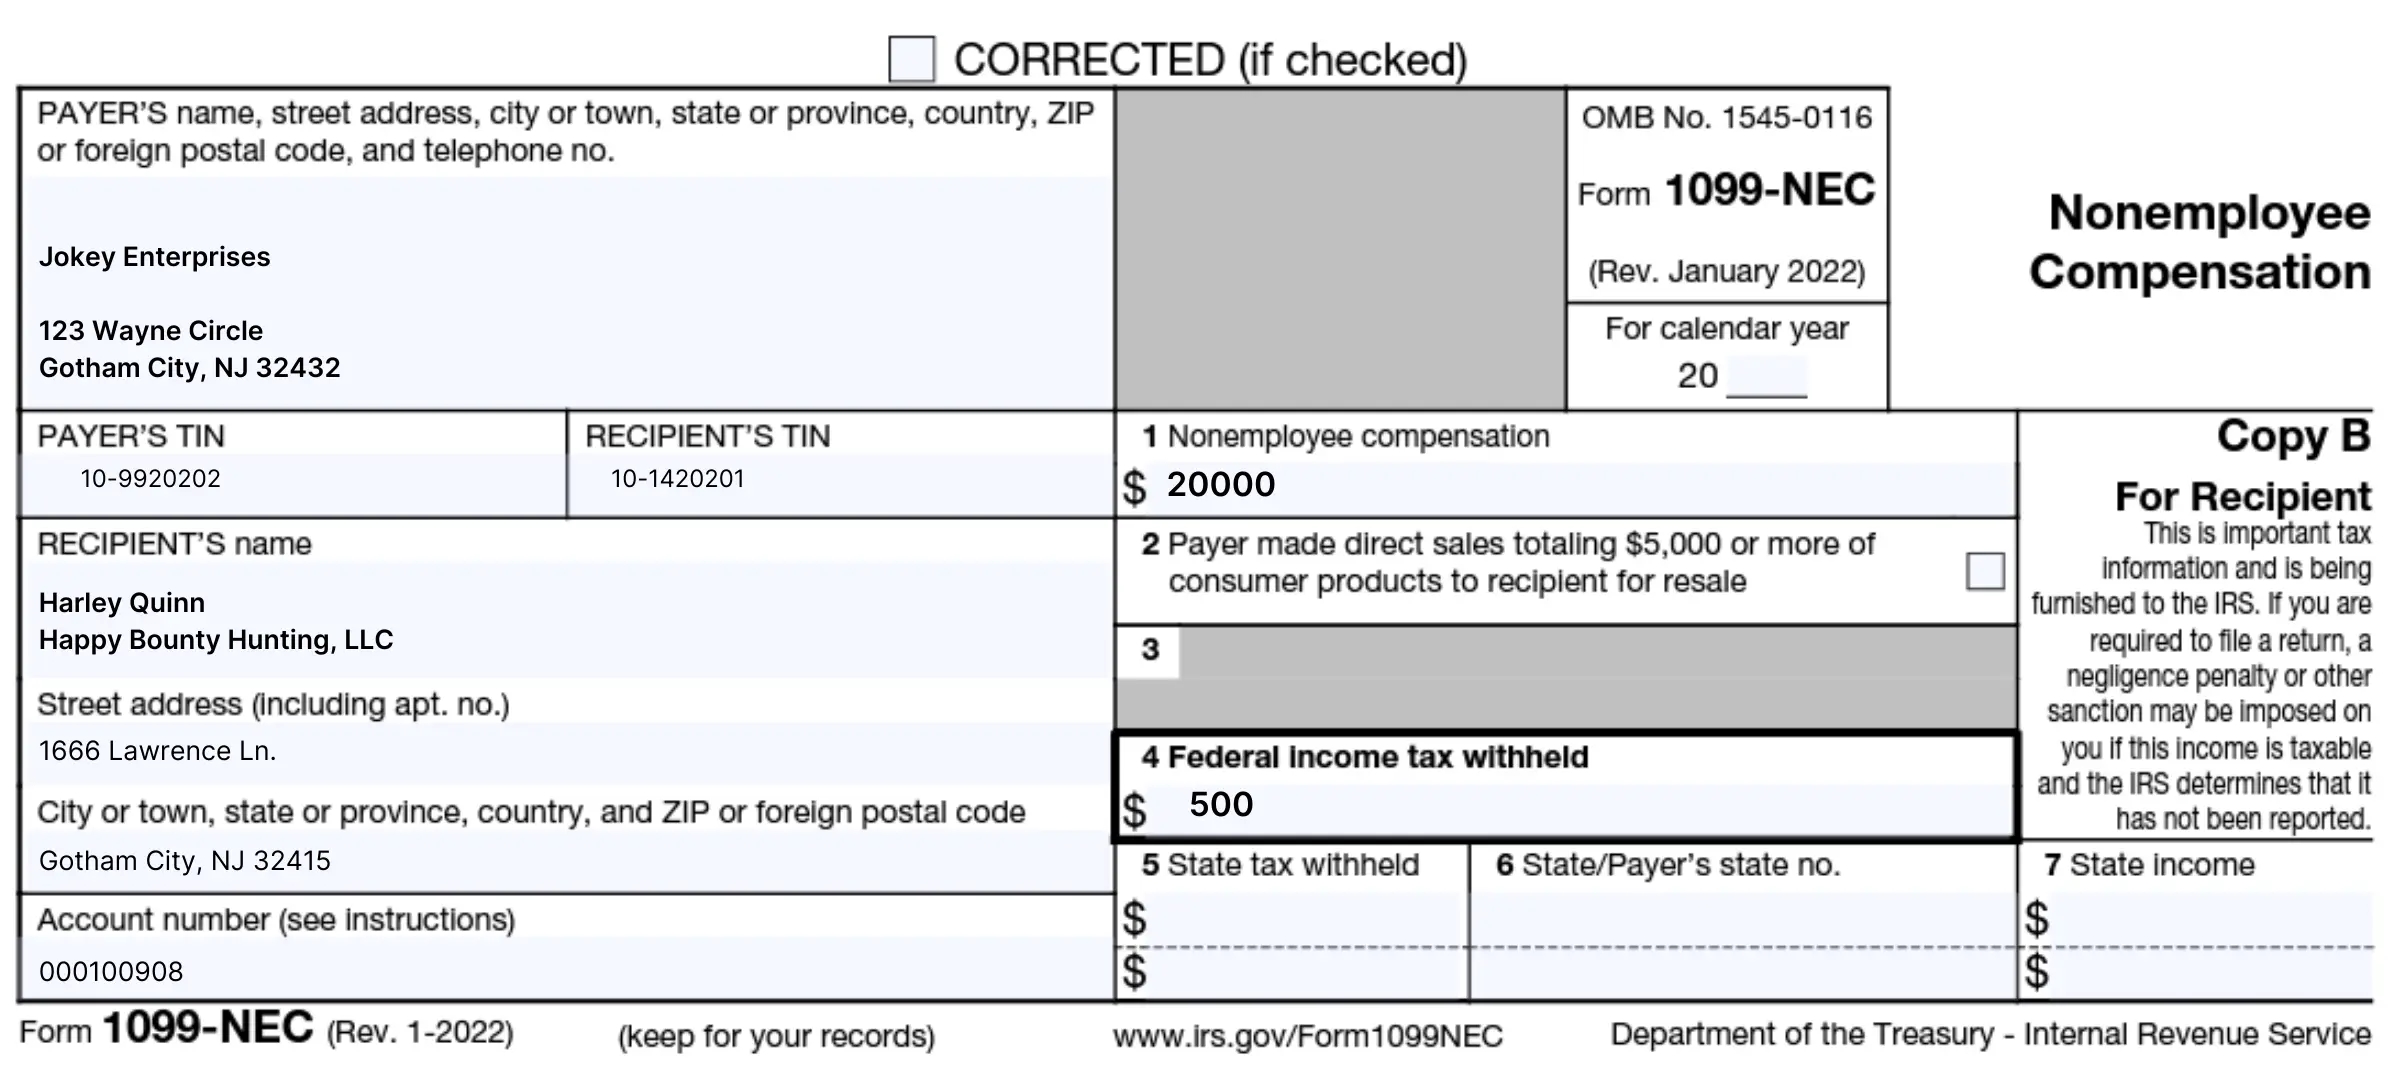 Understanding how Form 1099-NEC is filed